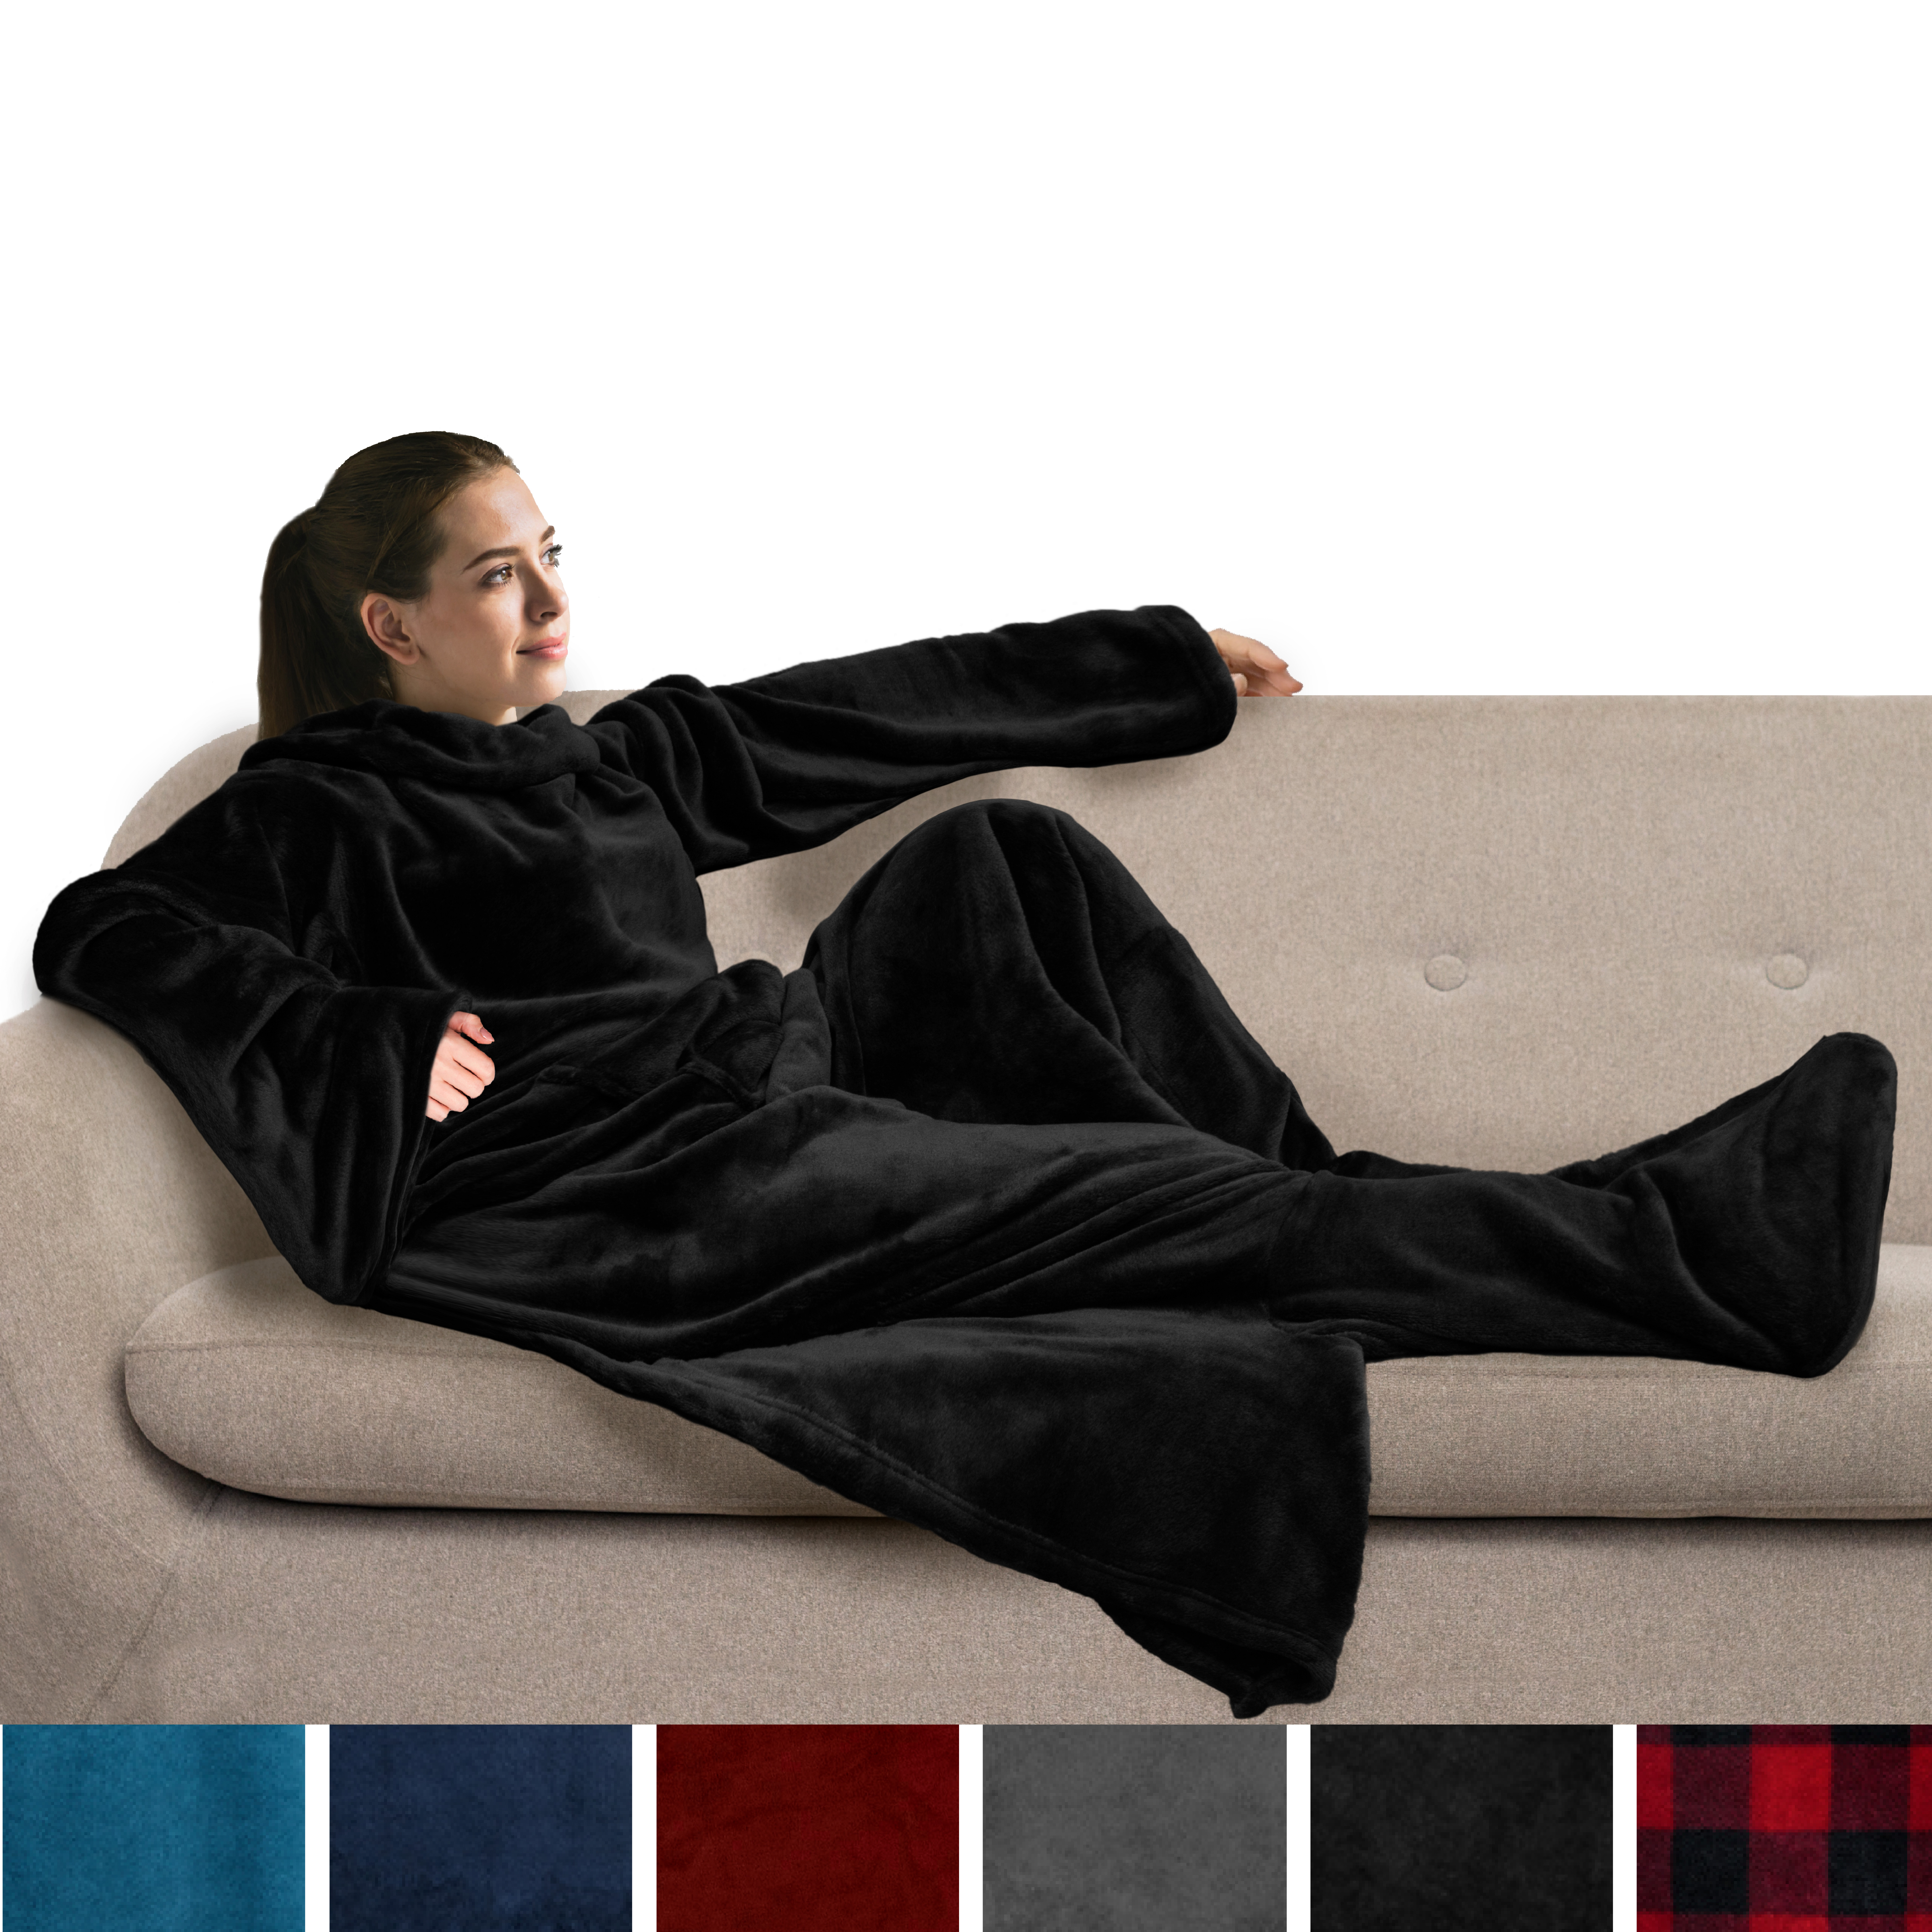 Snuggie Fleece Wearable Blanket With Sleeves And Foot Pocket Plush